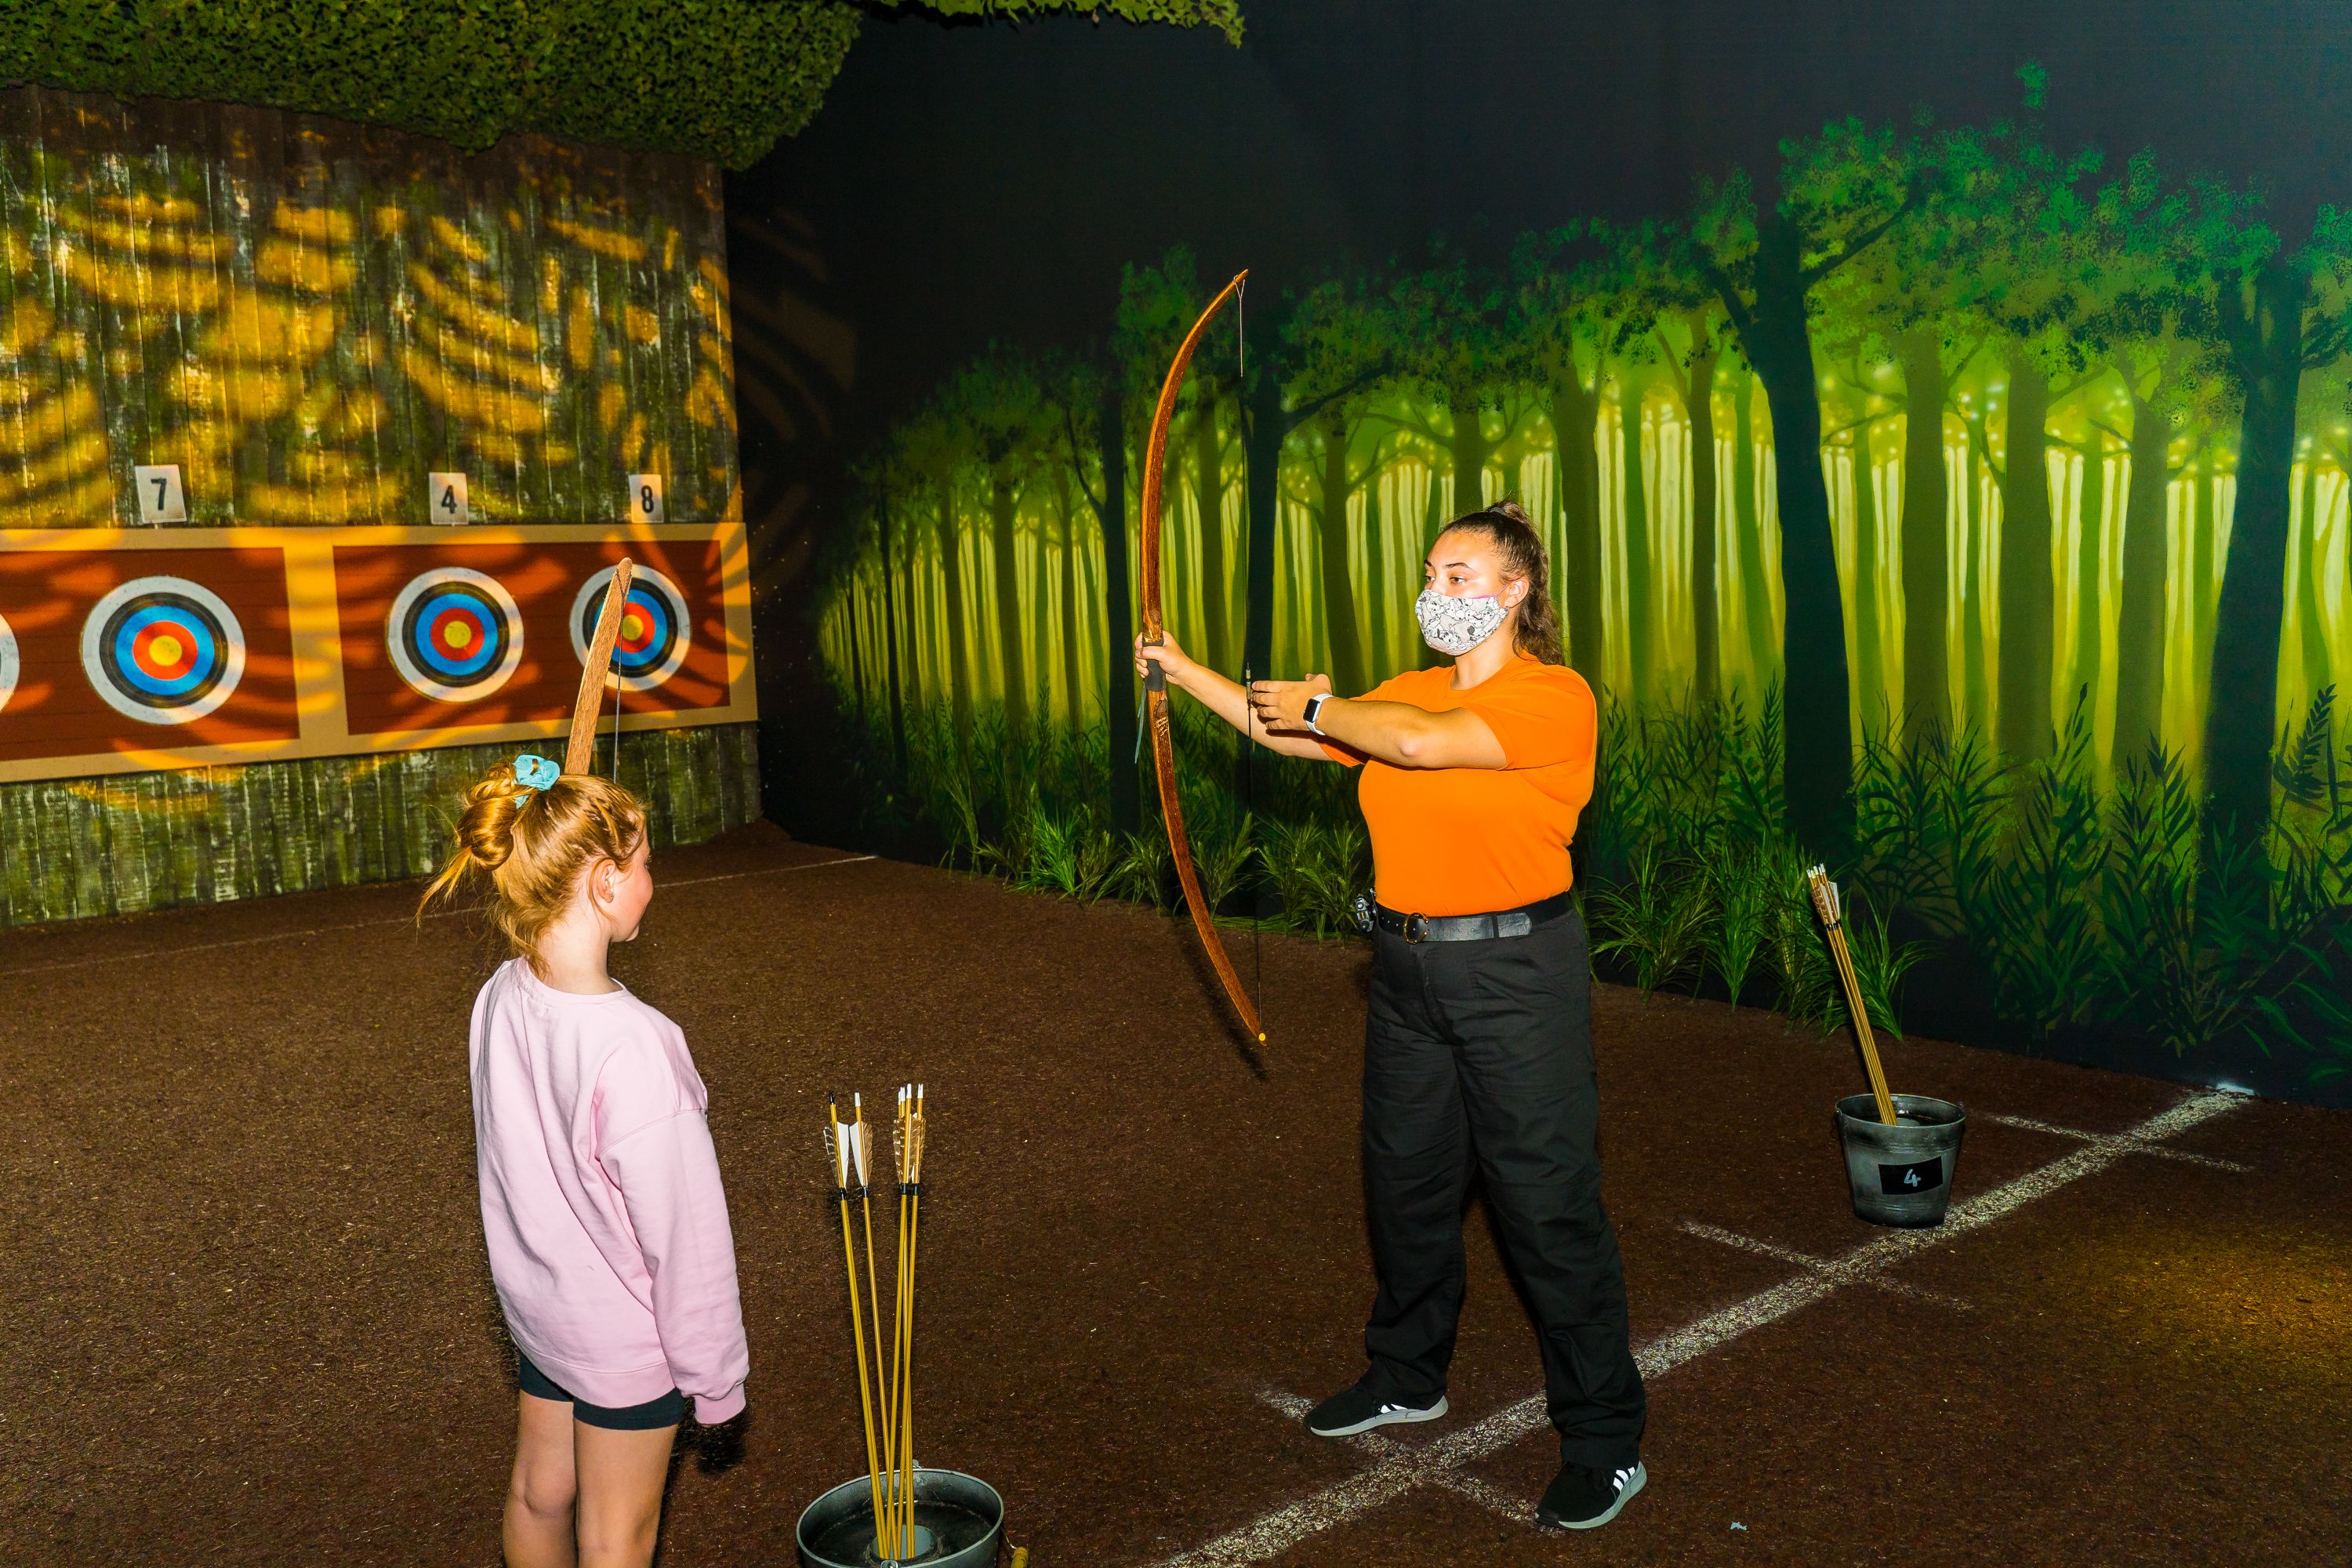 Instructor gives briefing on Archery range at The Bear Grylls Adventure Birmingham